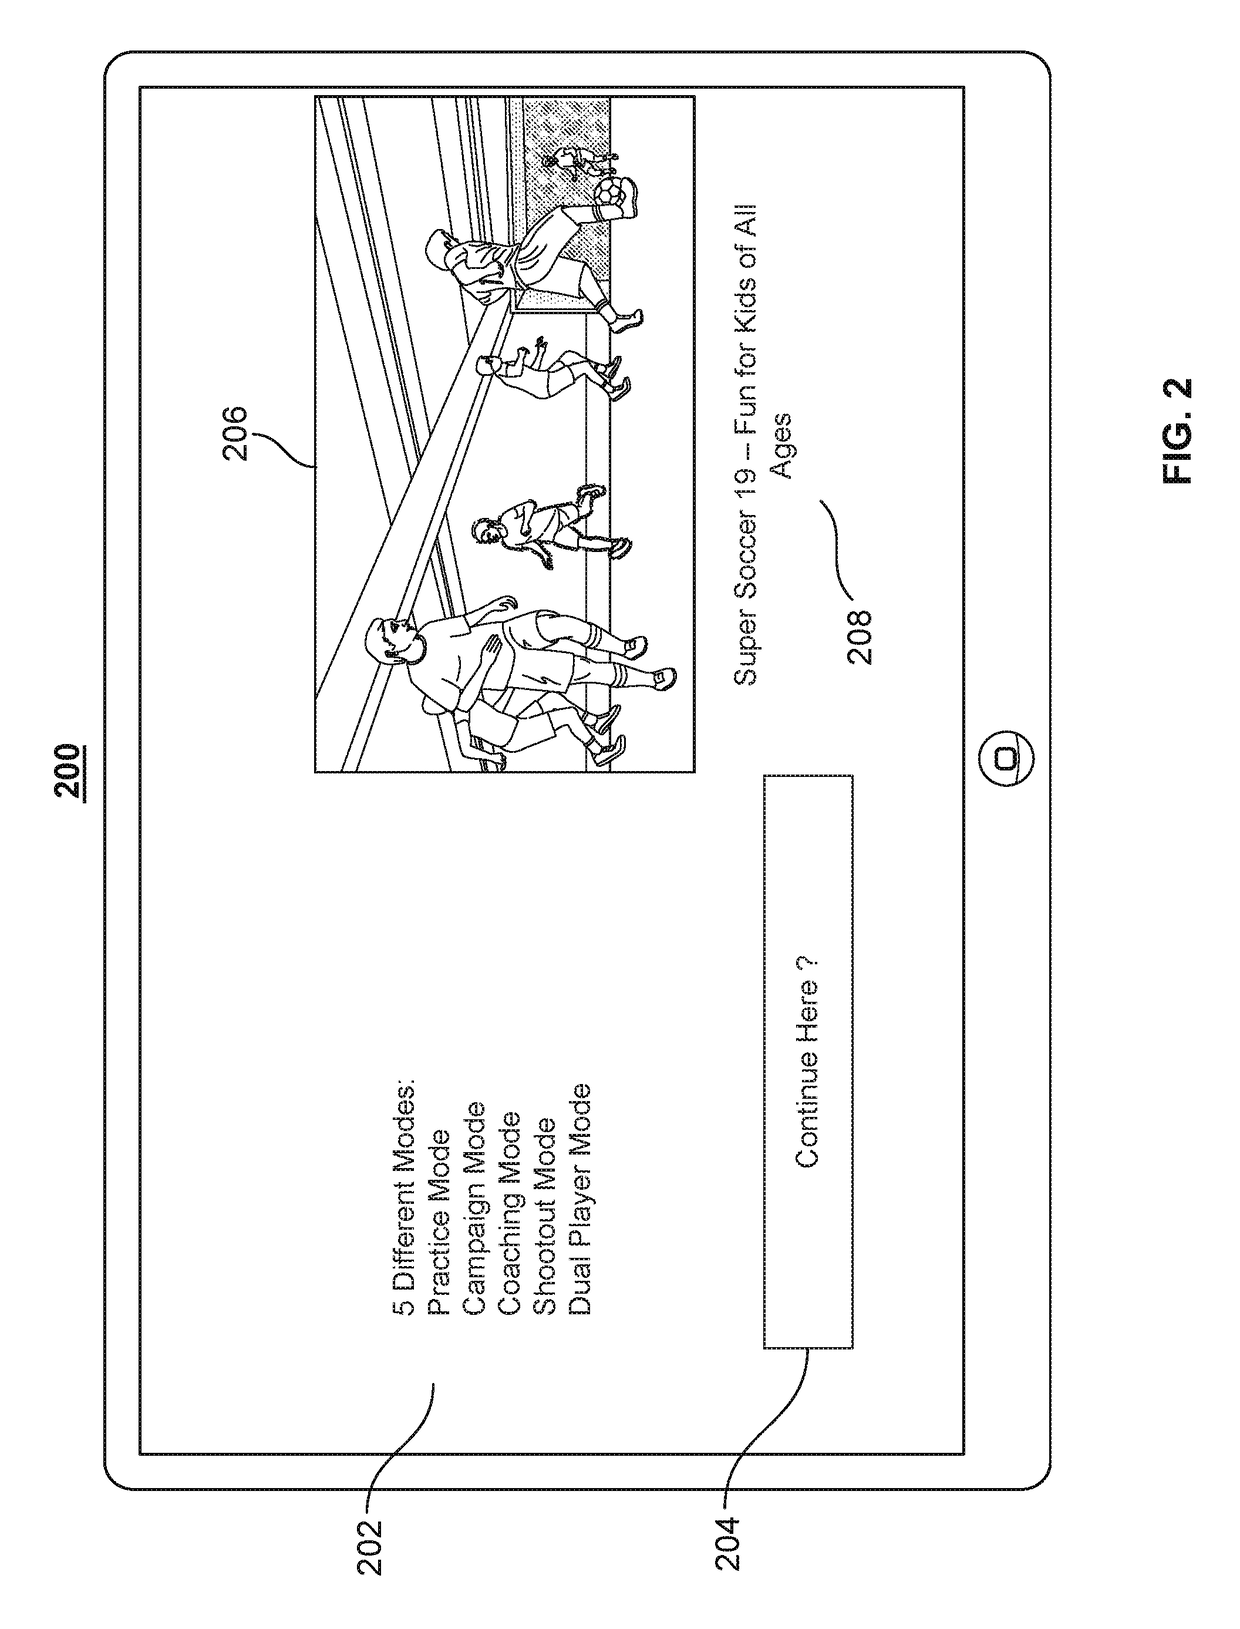 Method and system for transferring an interactive feature to another device